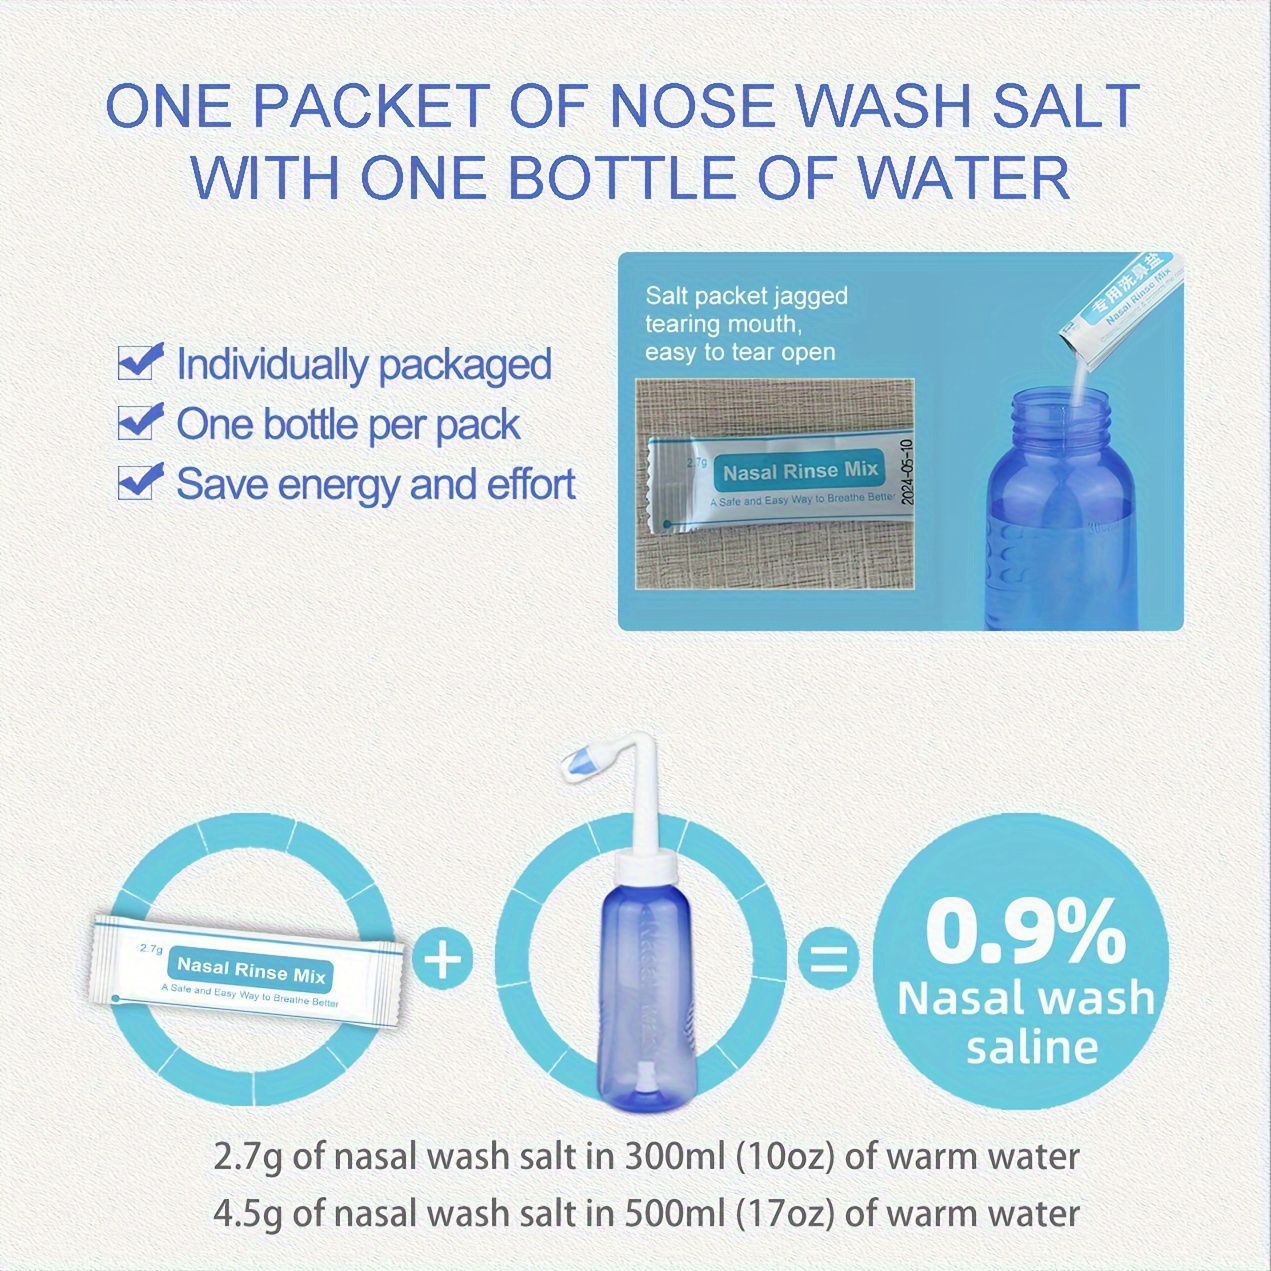 2.7g 60 Packs Nasal Irrigation Salt Nasal Rinse Mix Wash Nasal Salt For  300ml Cleans Moistens & Protects The Nose Health Care